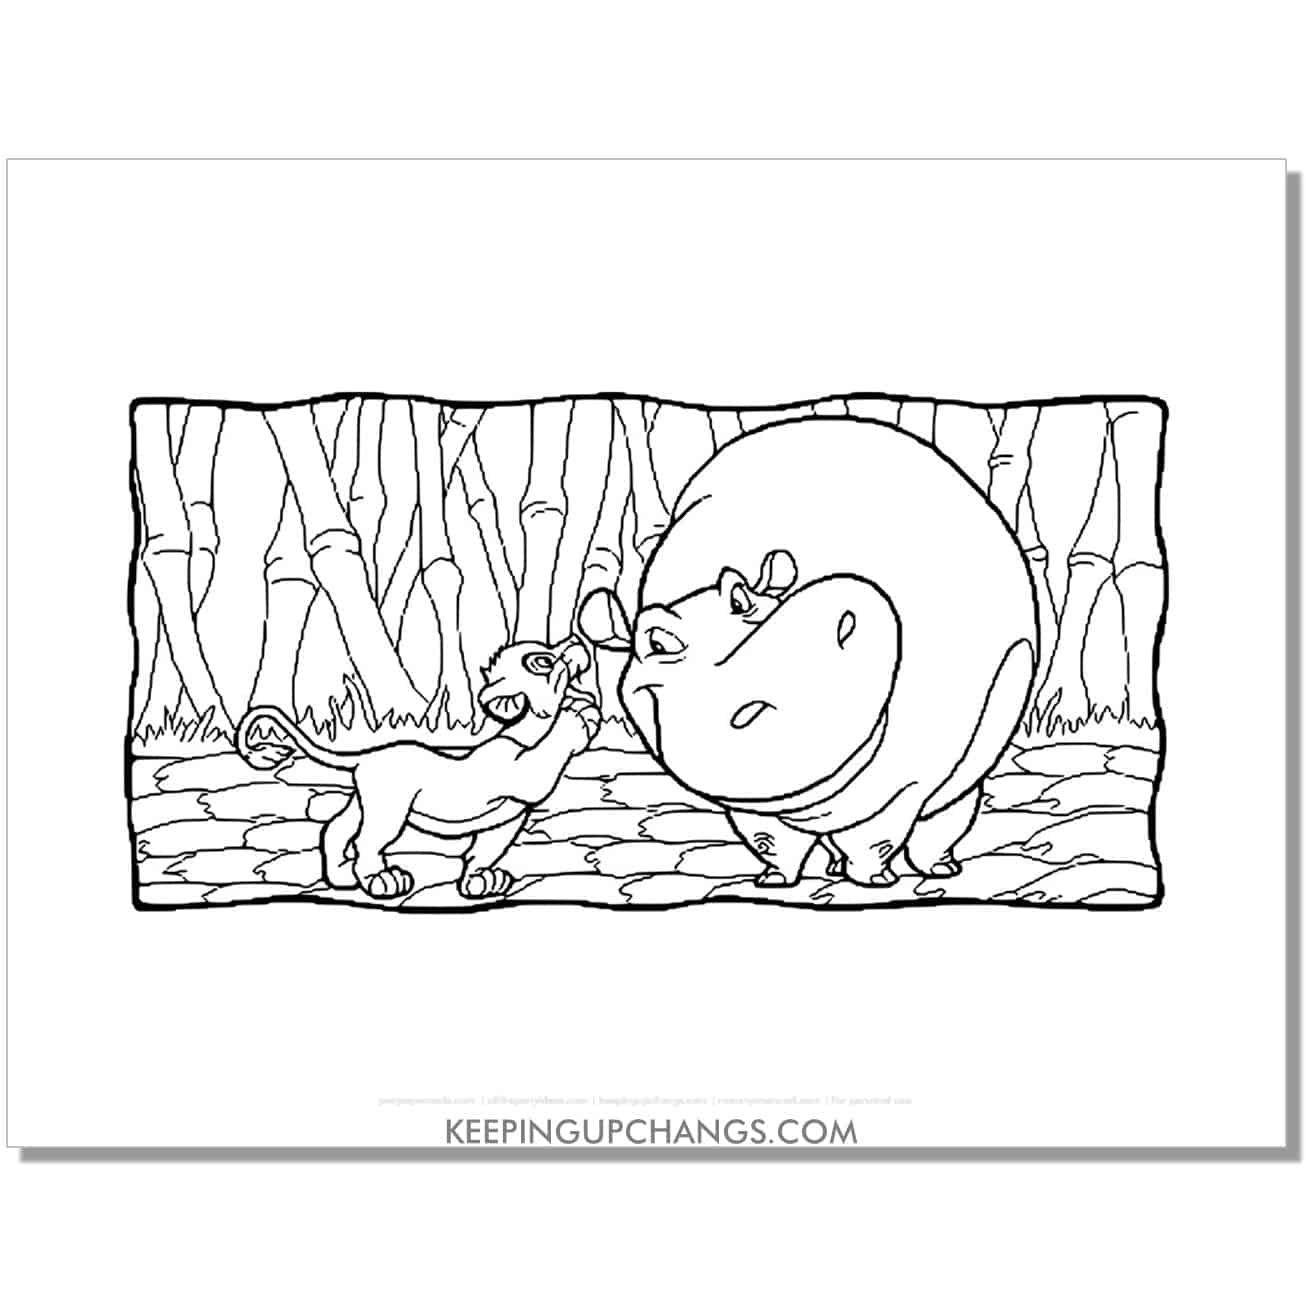 simba whispers in hippo's ear lion king coloring page, sheet.